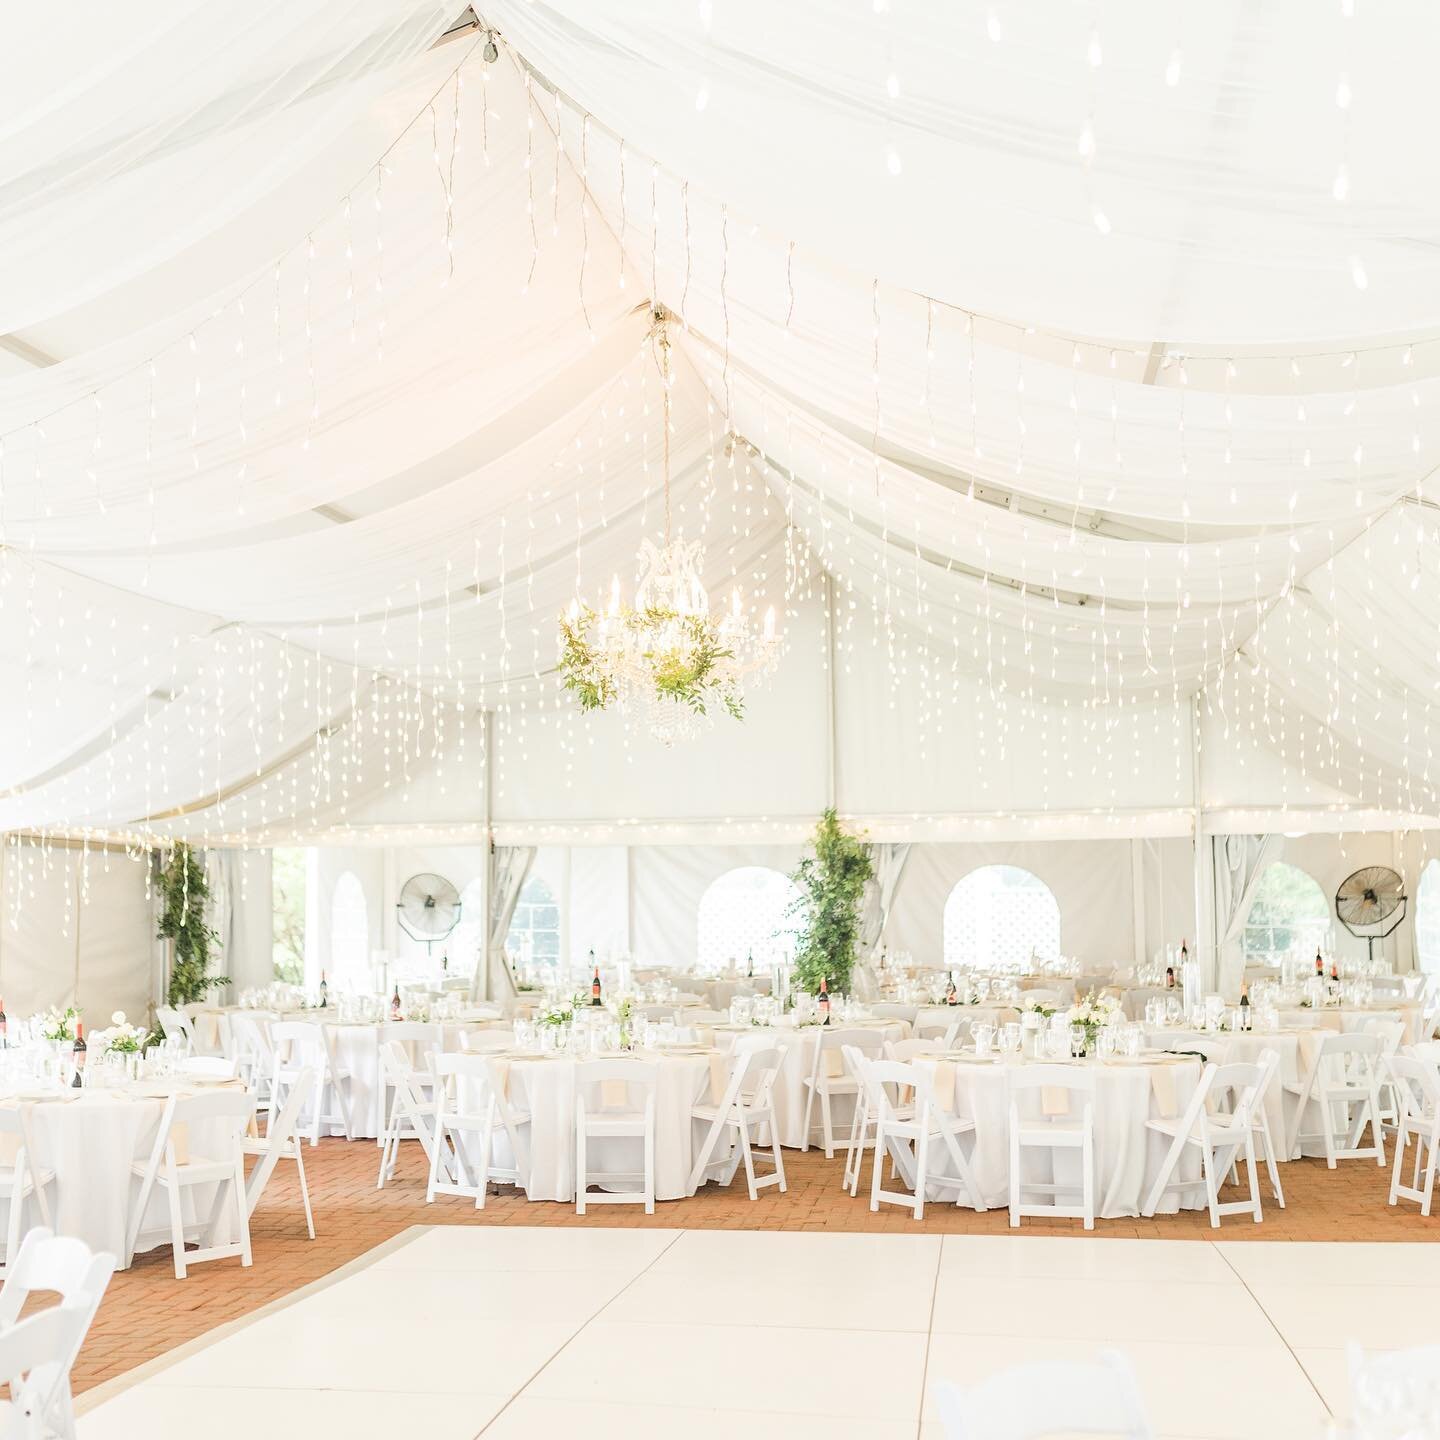 Let&rsquo;s talk receptions! Our goal is to provide a timeless canvas that our couples can personalize based on their unique love story and vision. Whether our couples are seeking a full-on dance party bash or a quieter, intimate family gathering to 